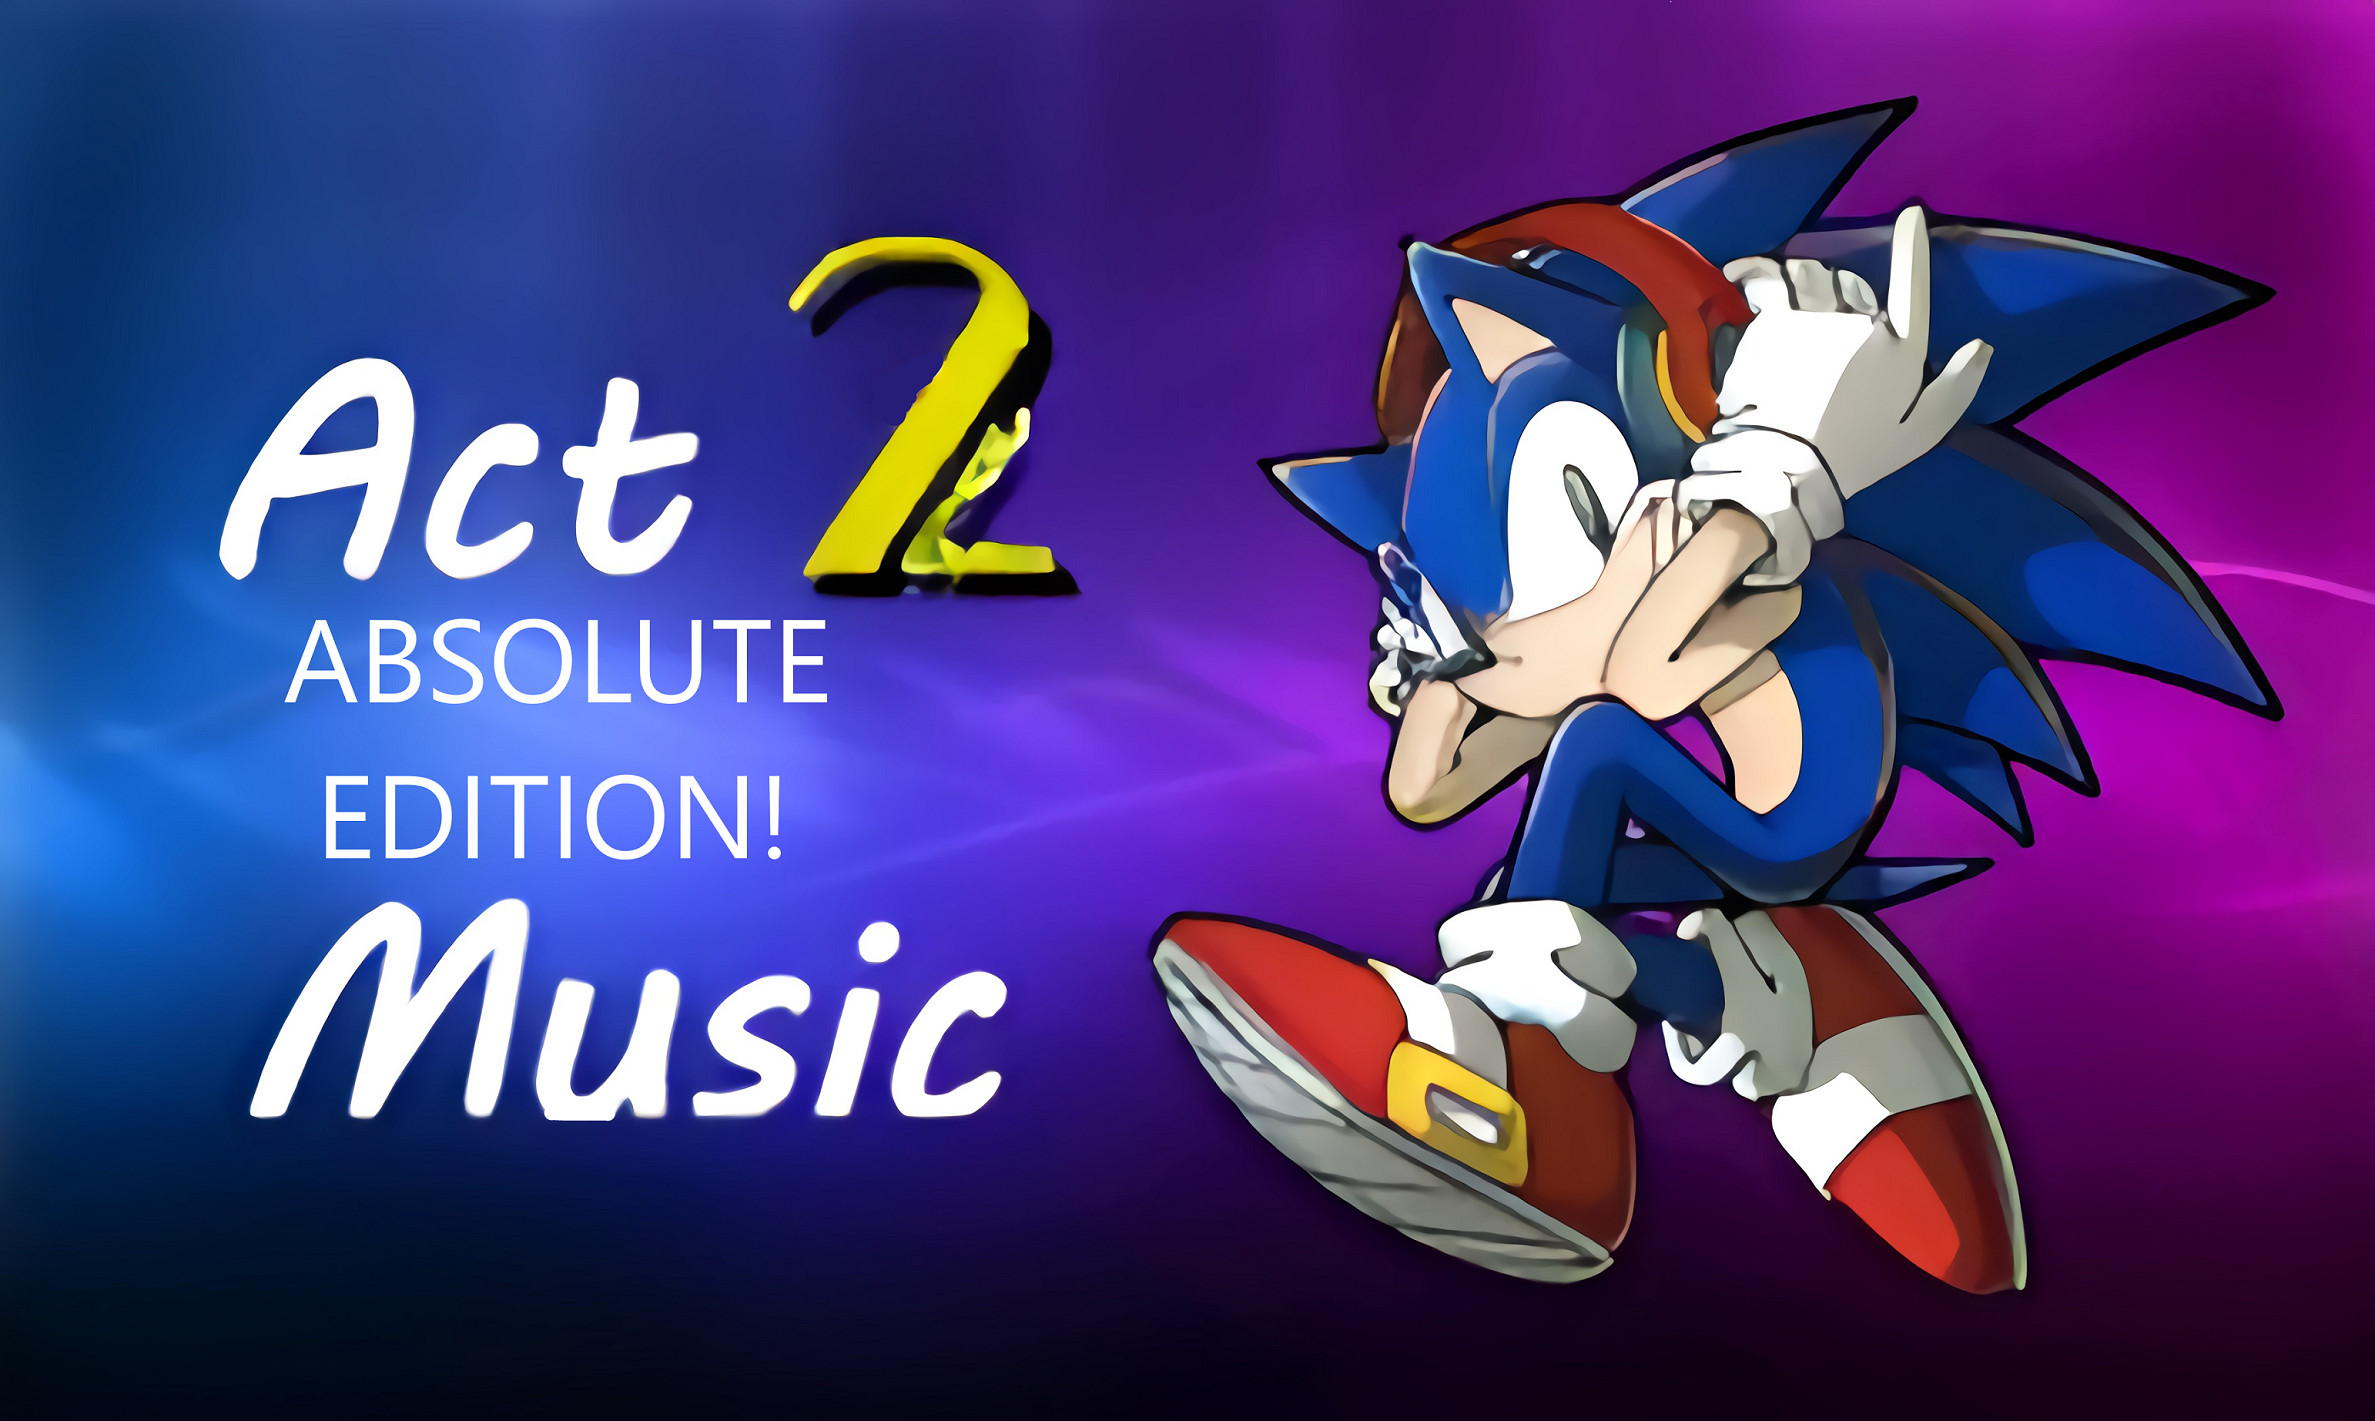 Sonic Music. Sonic 2 absolute org. Нойз Соник. Exstra Gamble Scramble Sonic 2 Absolut. Sonic absolute mods